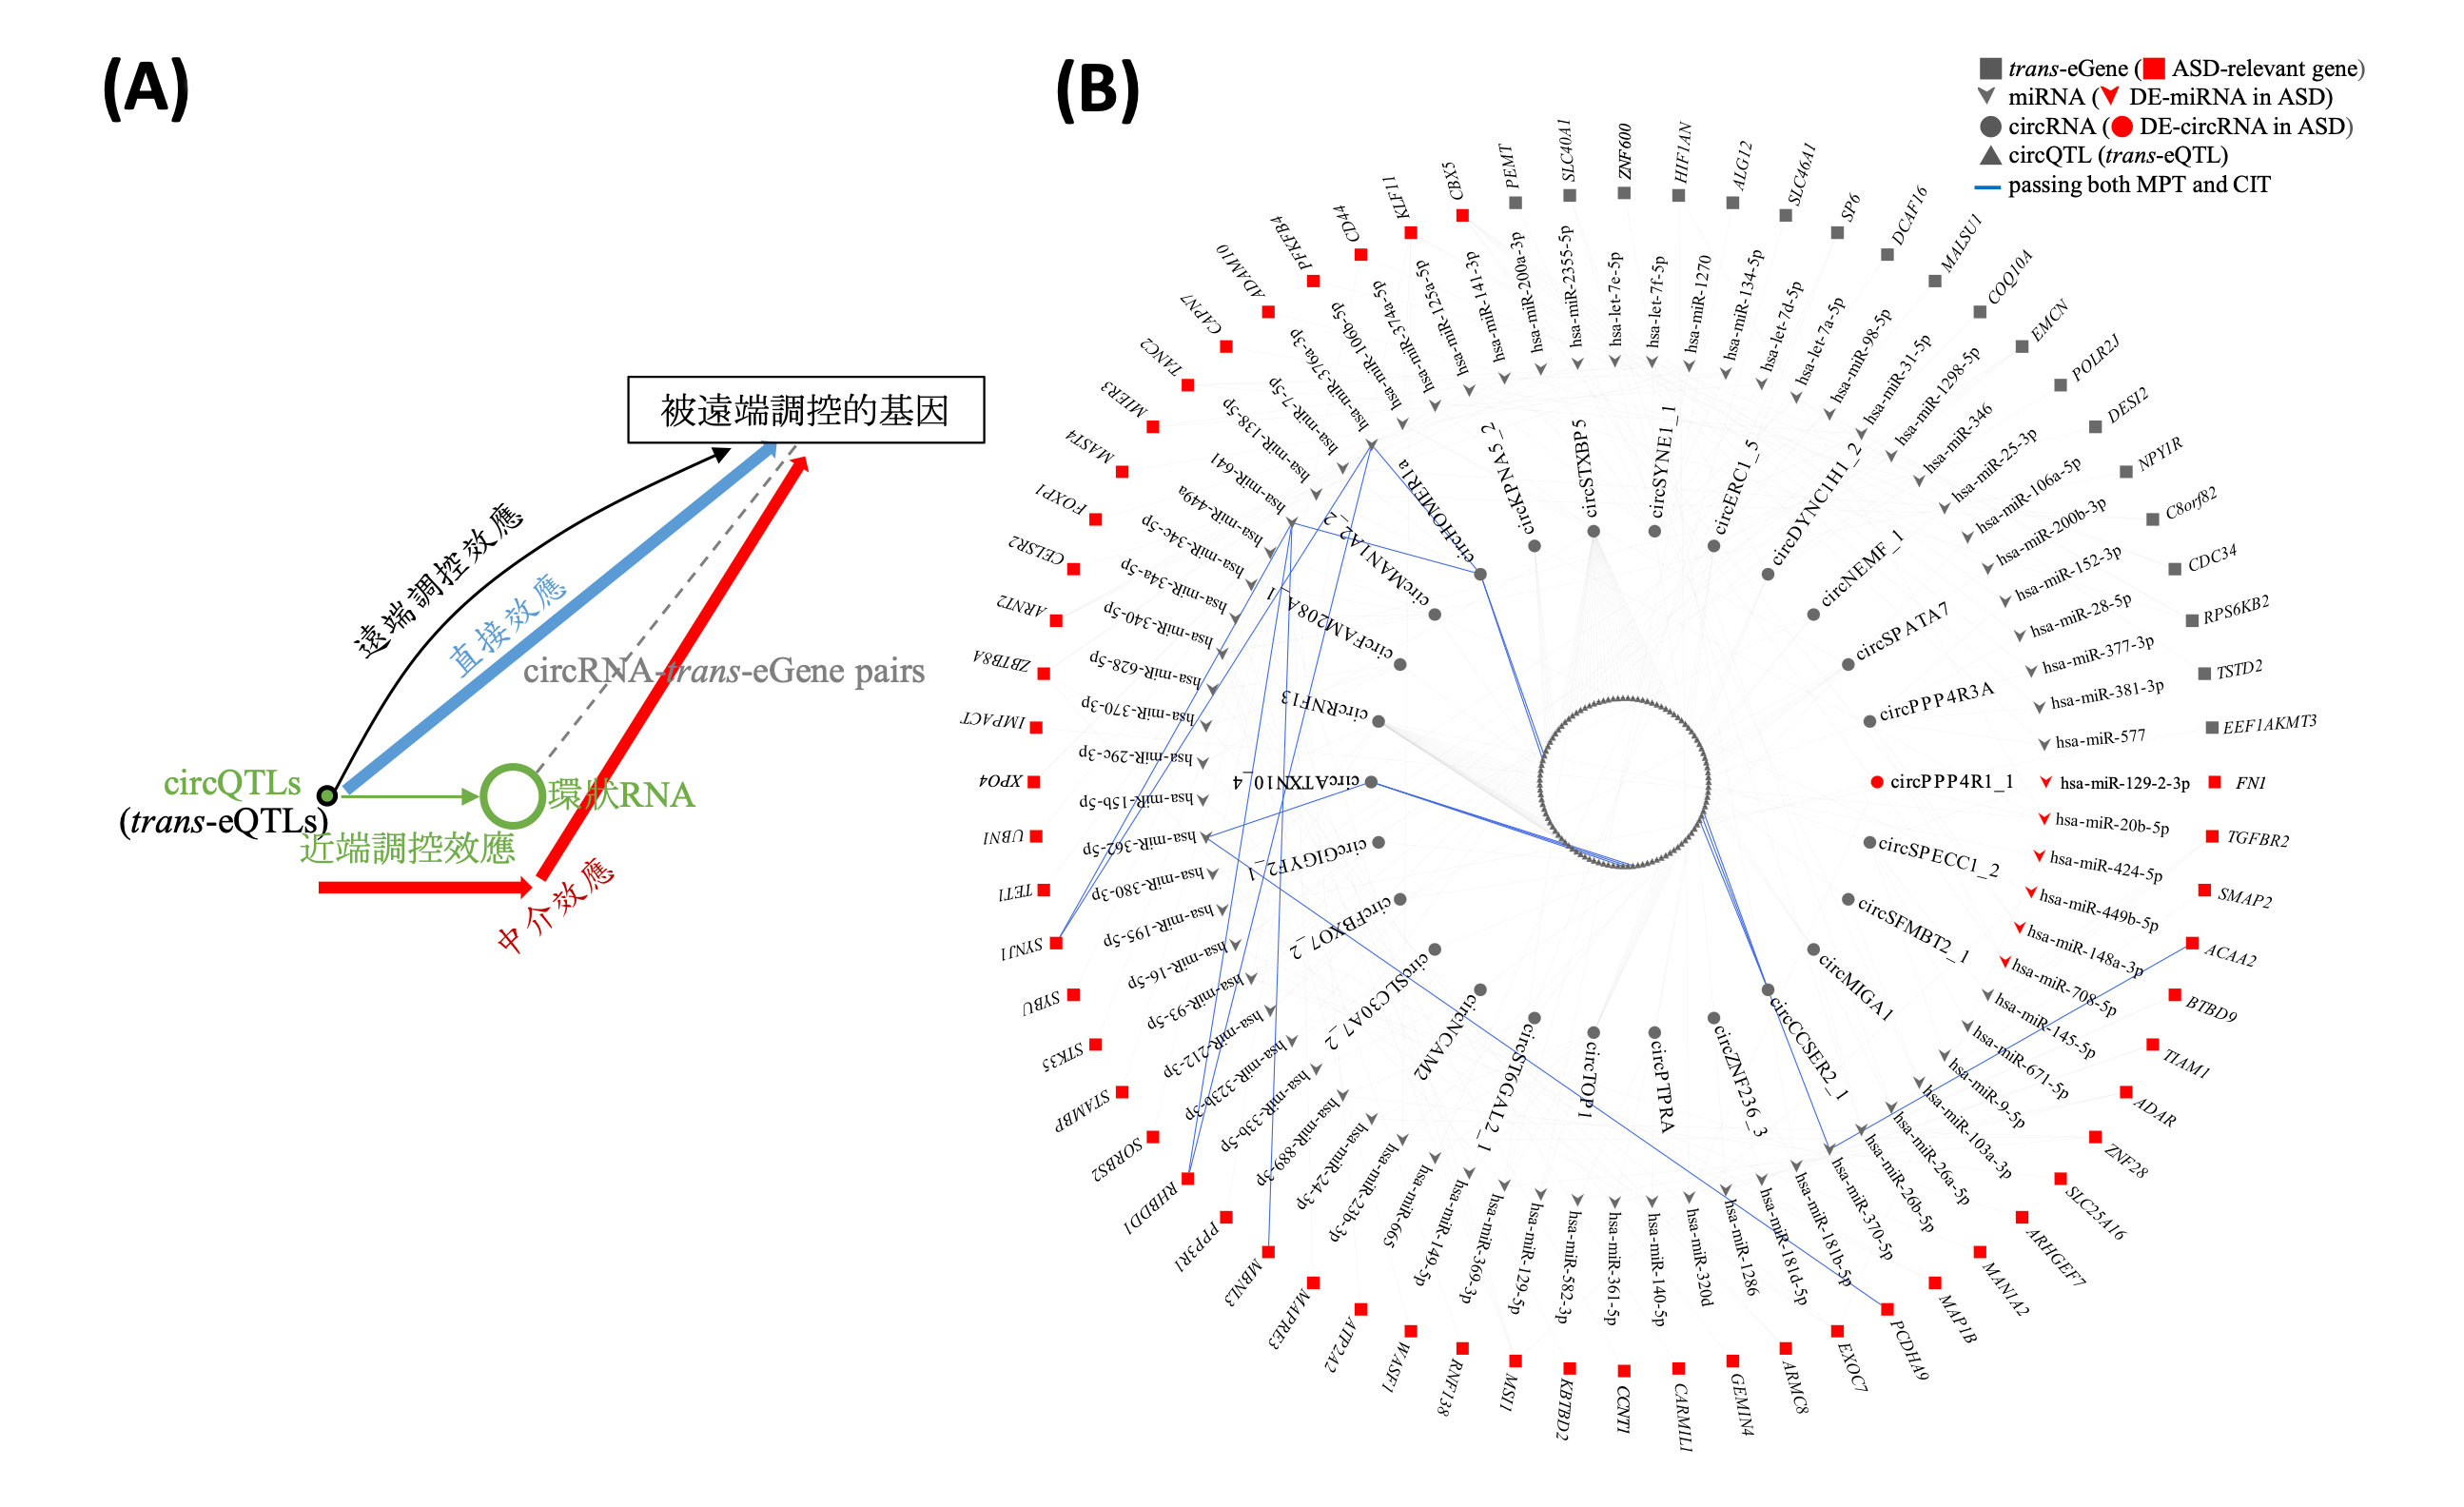 The circles Part II: investigating causal relationship between genetic variants and circular RNA expression in autism